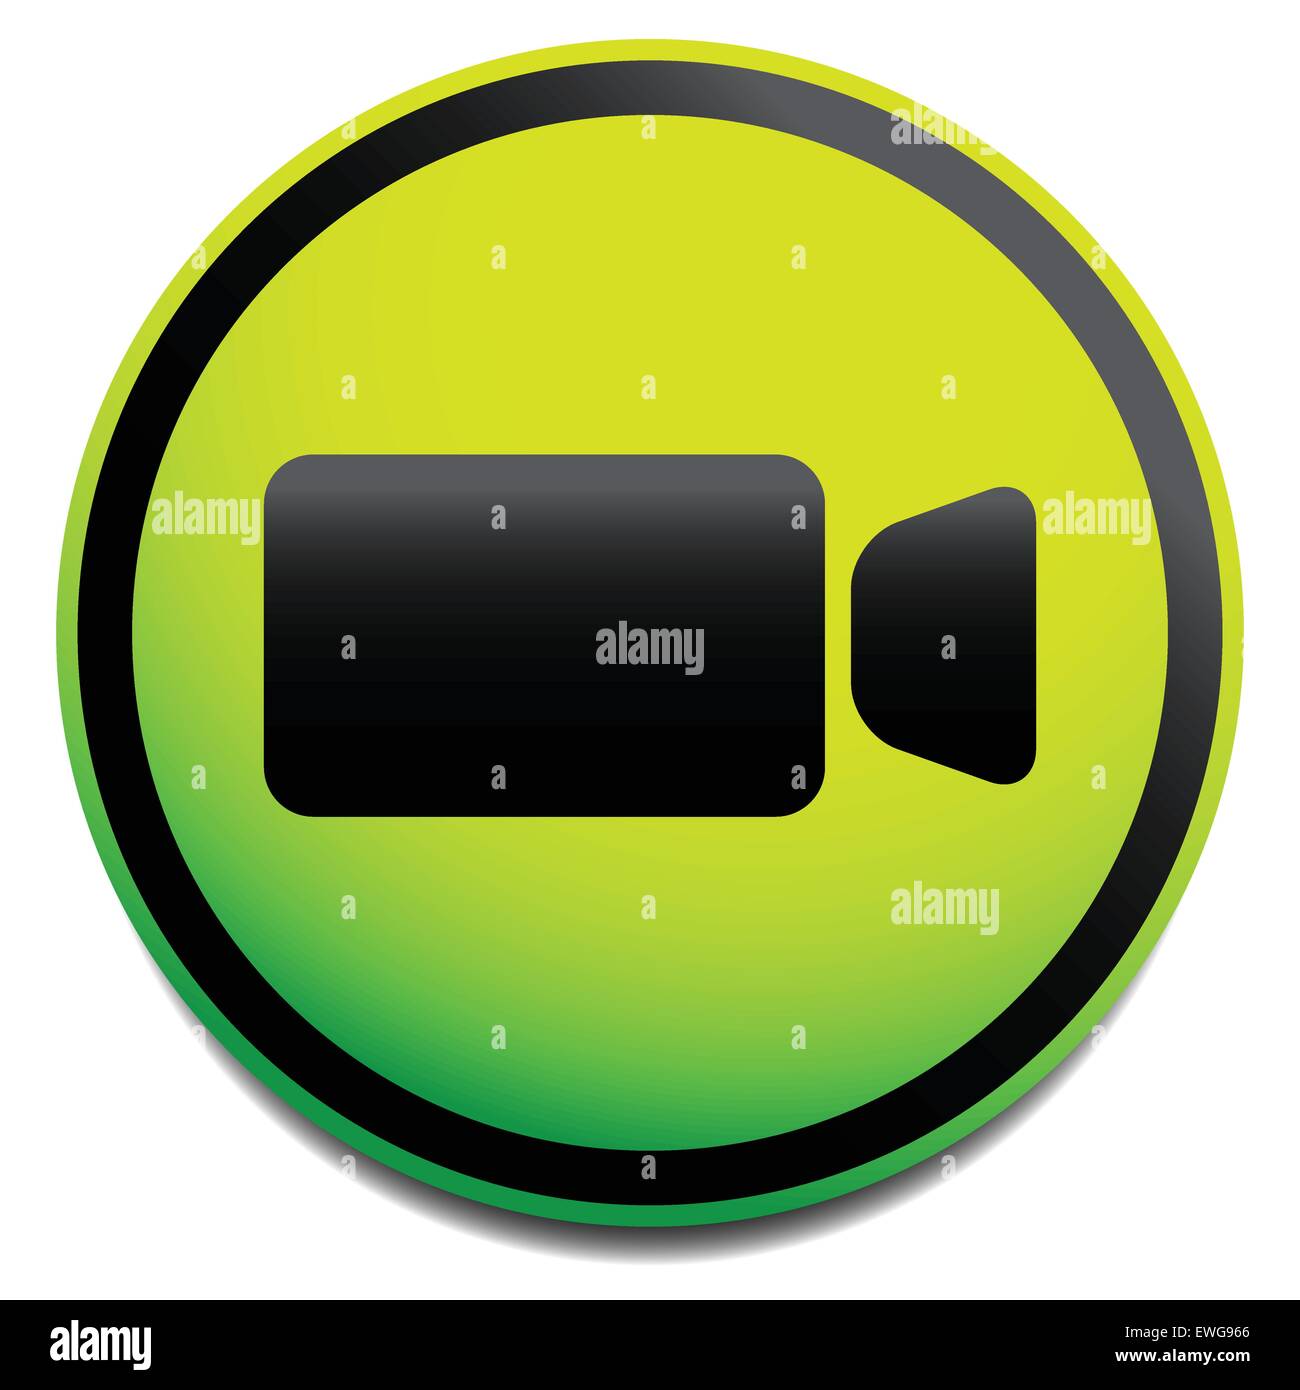 Round icon with small, compact video camera, handycam symbol Icon for video, multimedia, filming concepts. Stock Vector